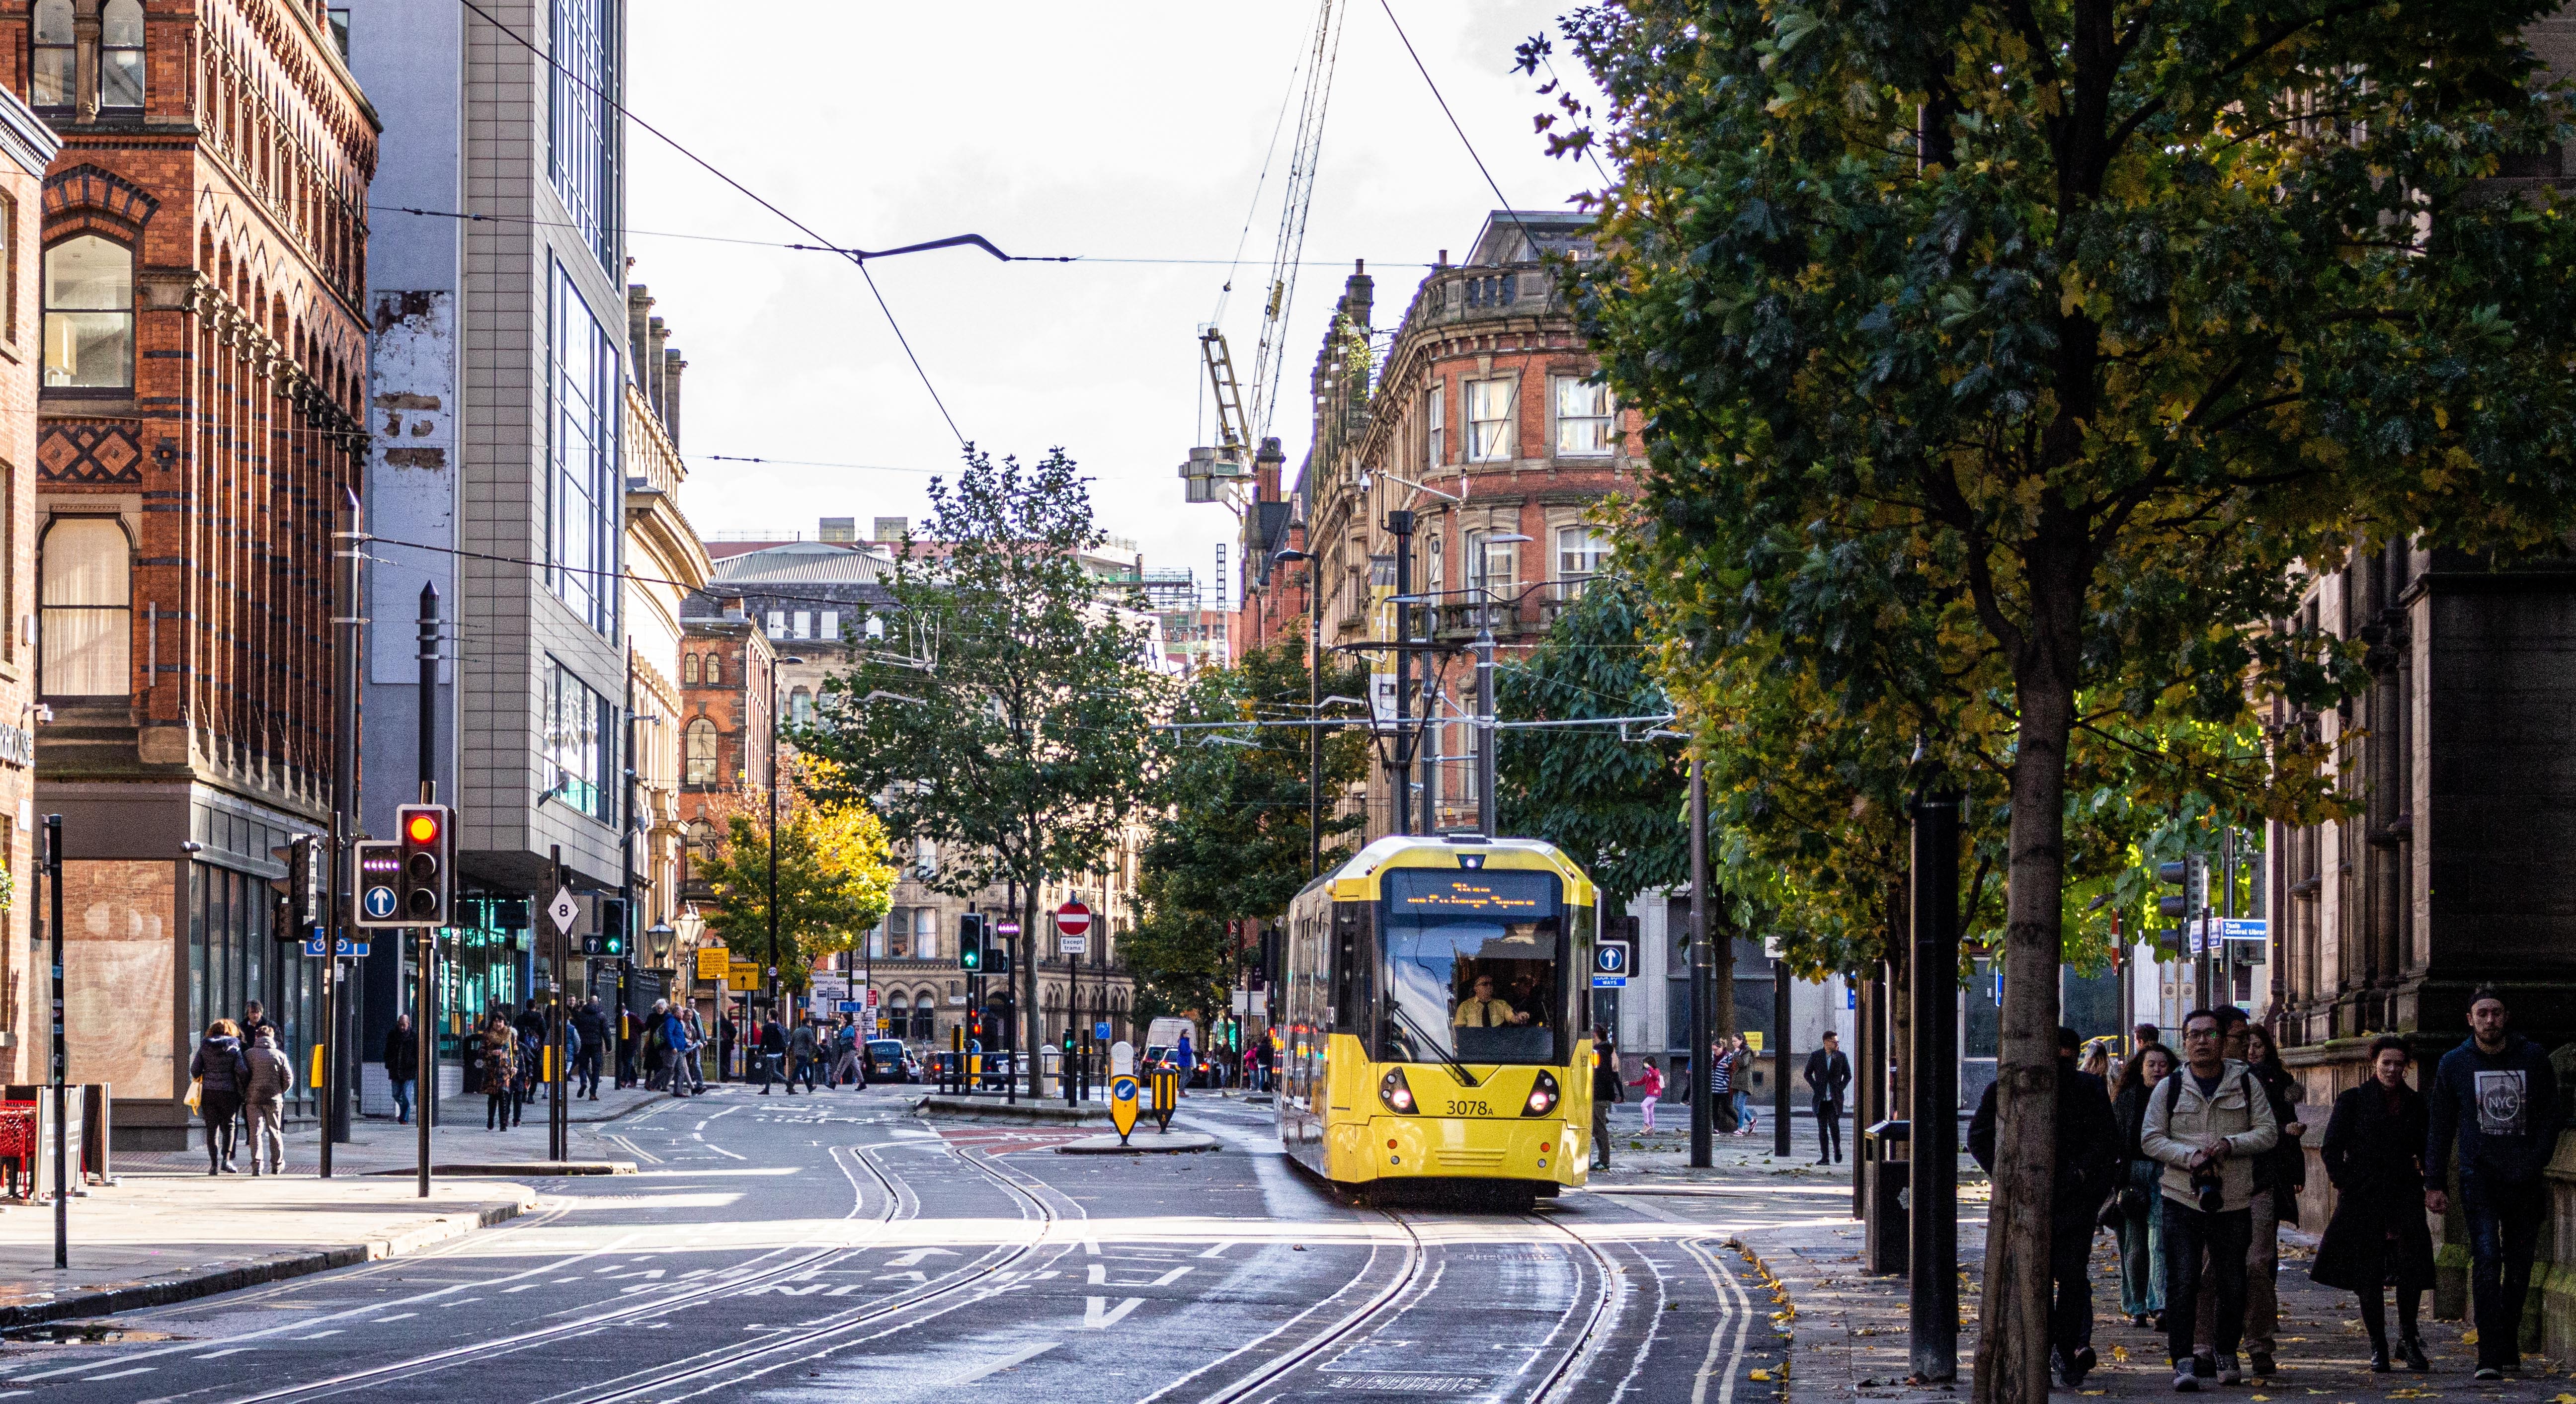 For high yields on your next investment, head to Manchester